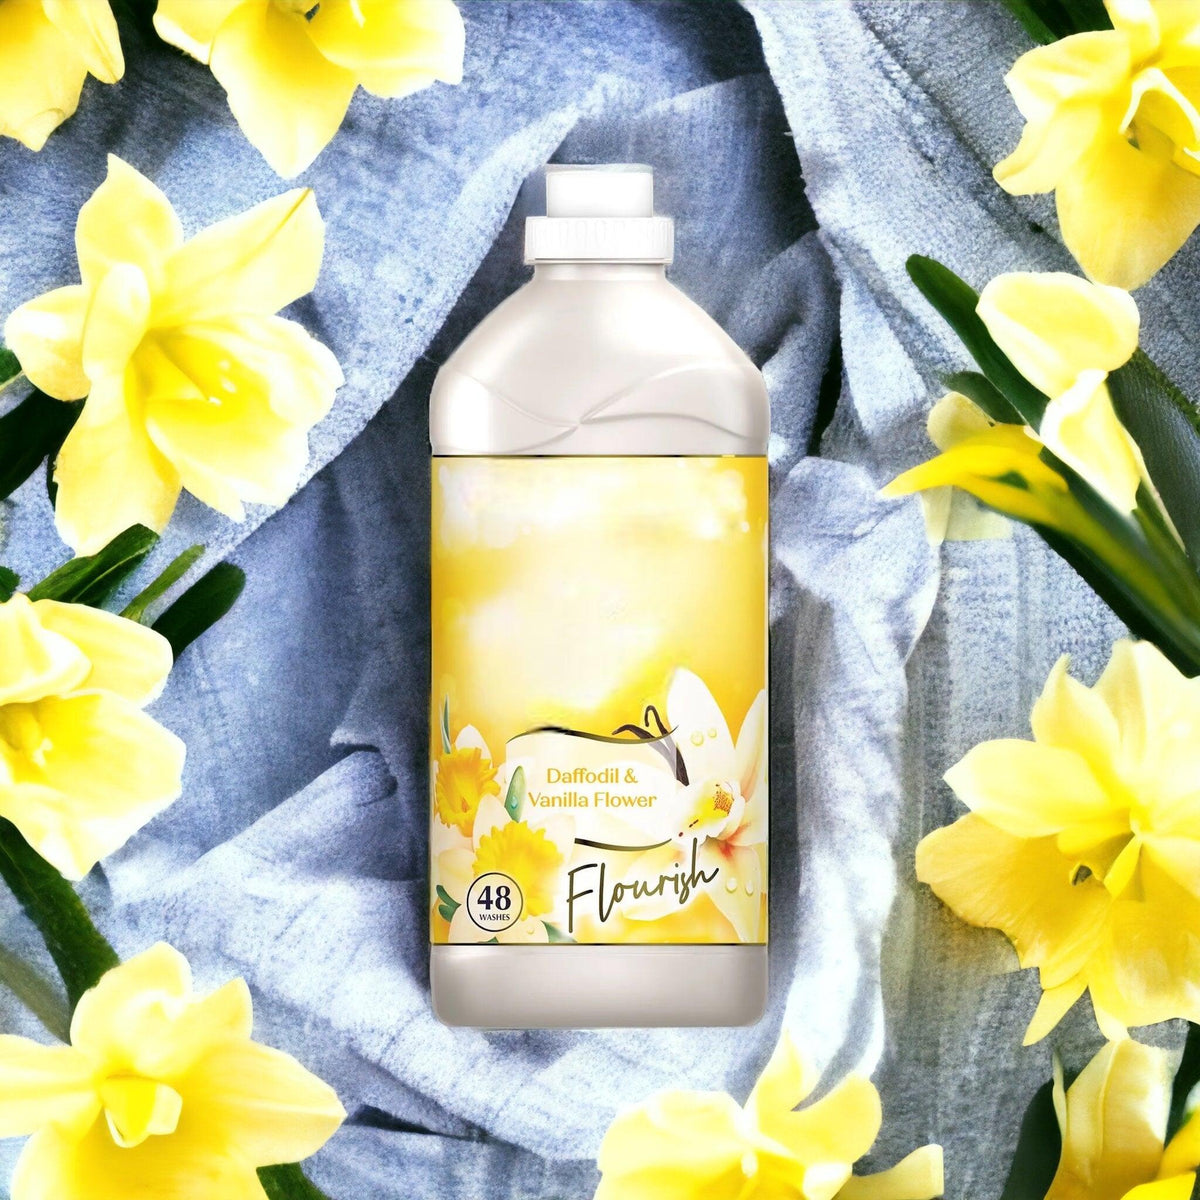 Leonora Daffodil & Vanilla Fragrance Oil - Craftiful Fragrance Oils - Supplies for Wax Melts, Candles, Room Sprays, Reed Diffusers, Bath Bombs, Soaps, Perfumes, Bath Salts and Body Sprays